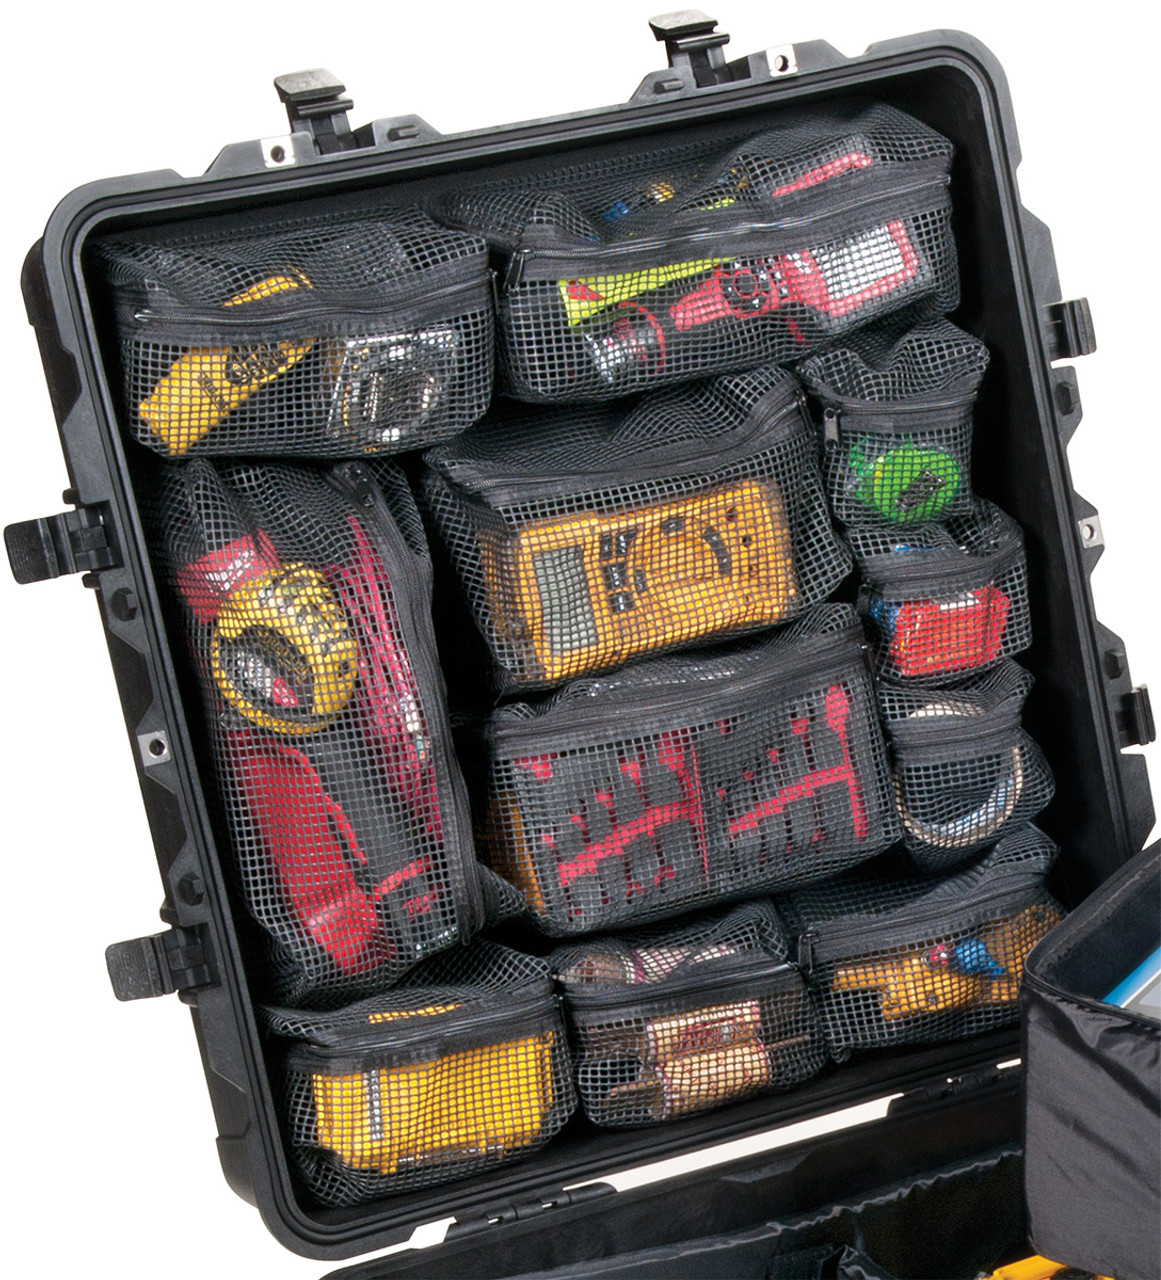 Pelican 1640 Case with Foam on Sale Today!